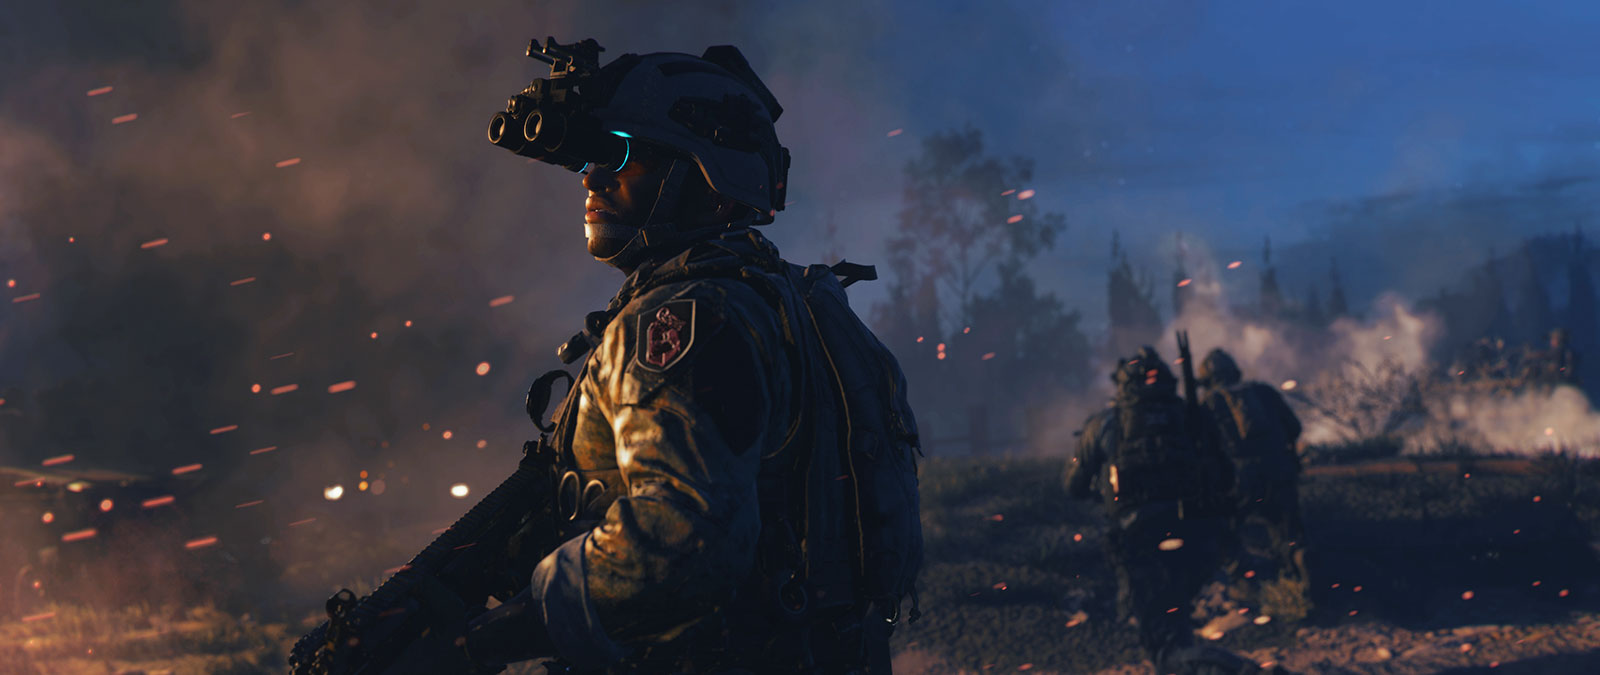 A soldier wearing night vision goggles looks over his shoulder towards distant fire and smoke.